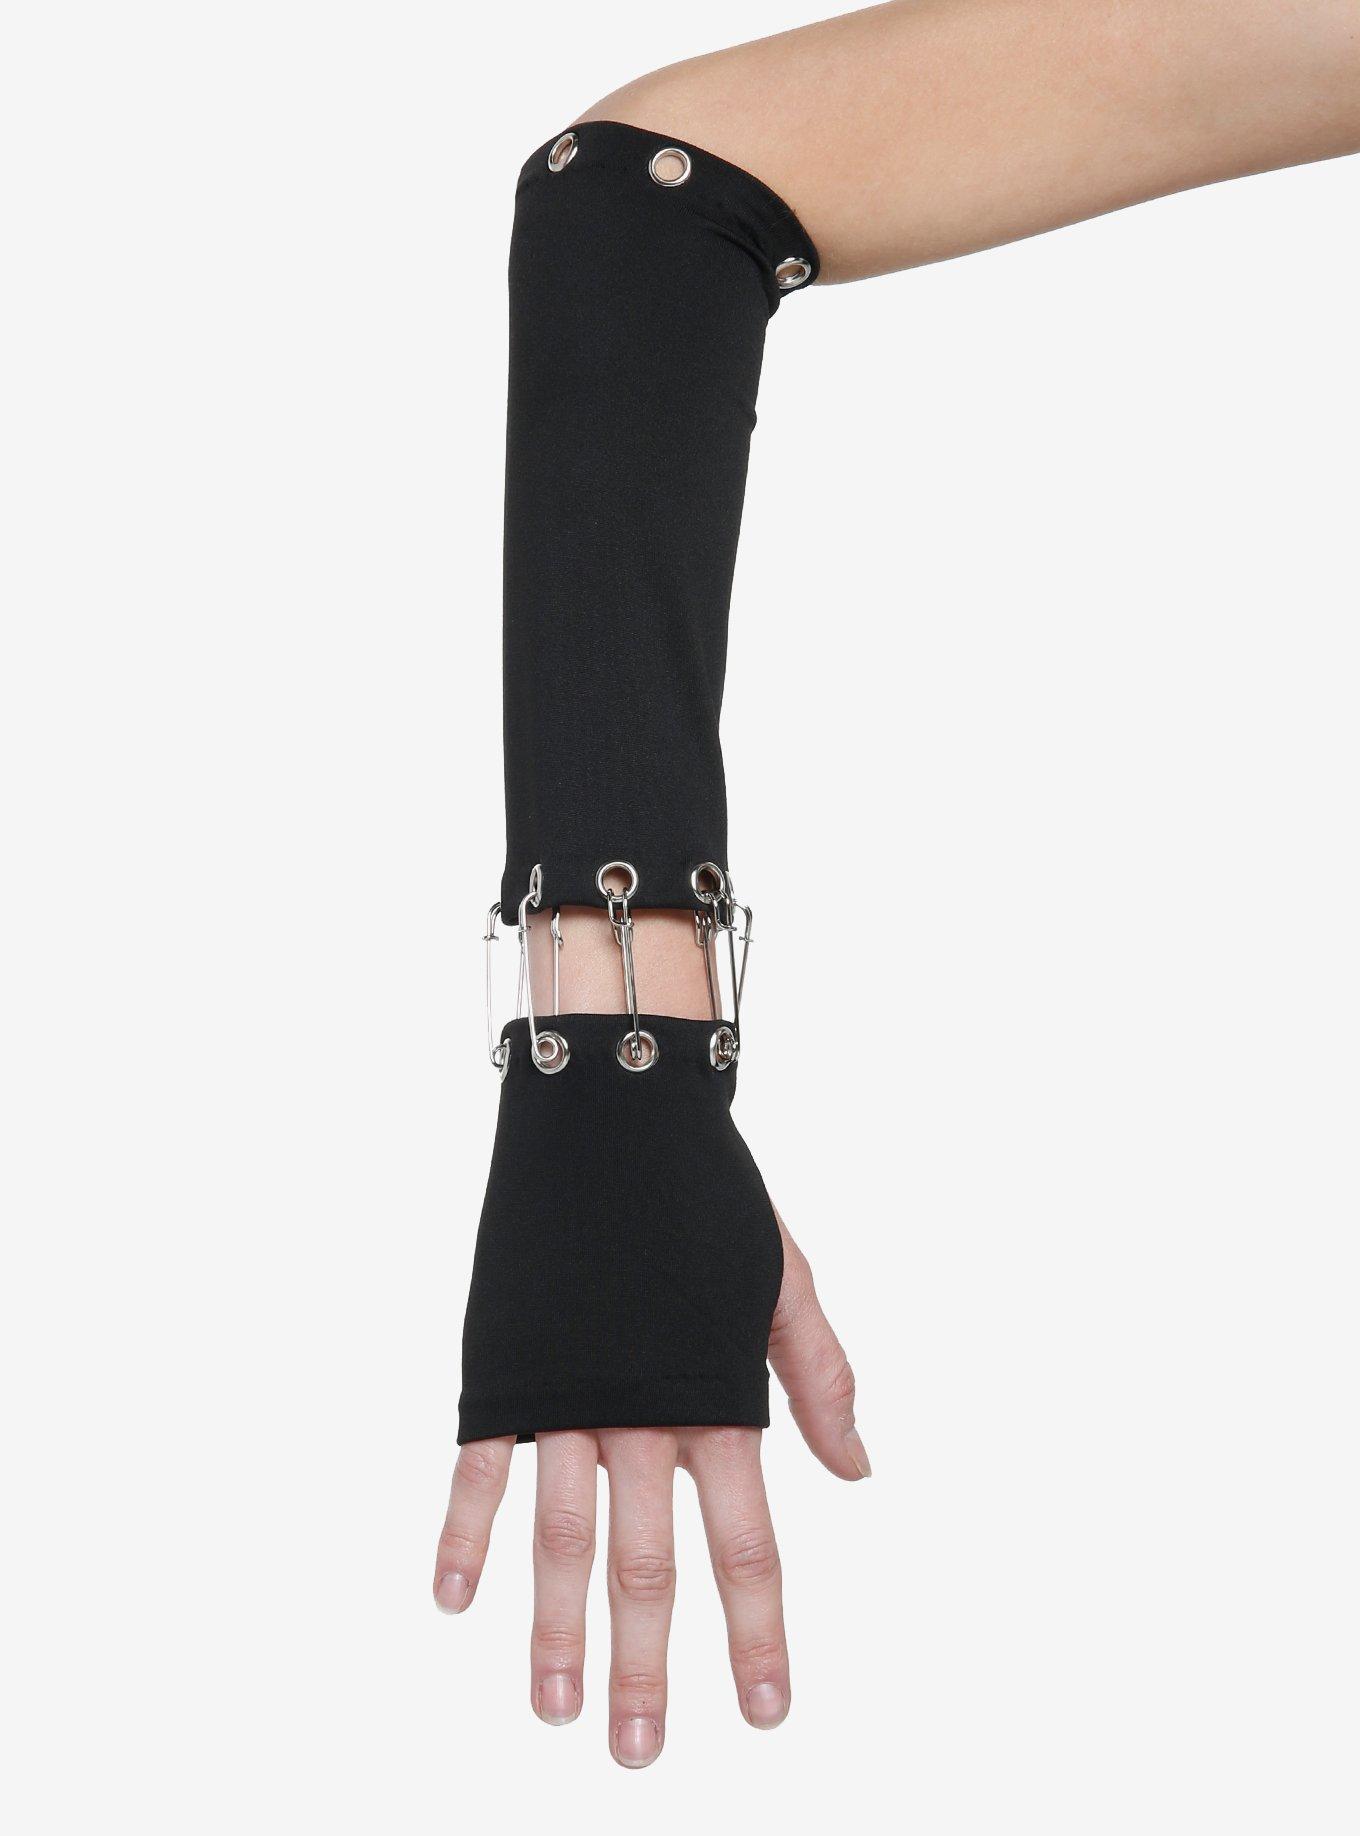 Grommet Safety Pin Cutout Arm Warmers